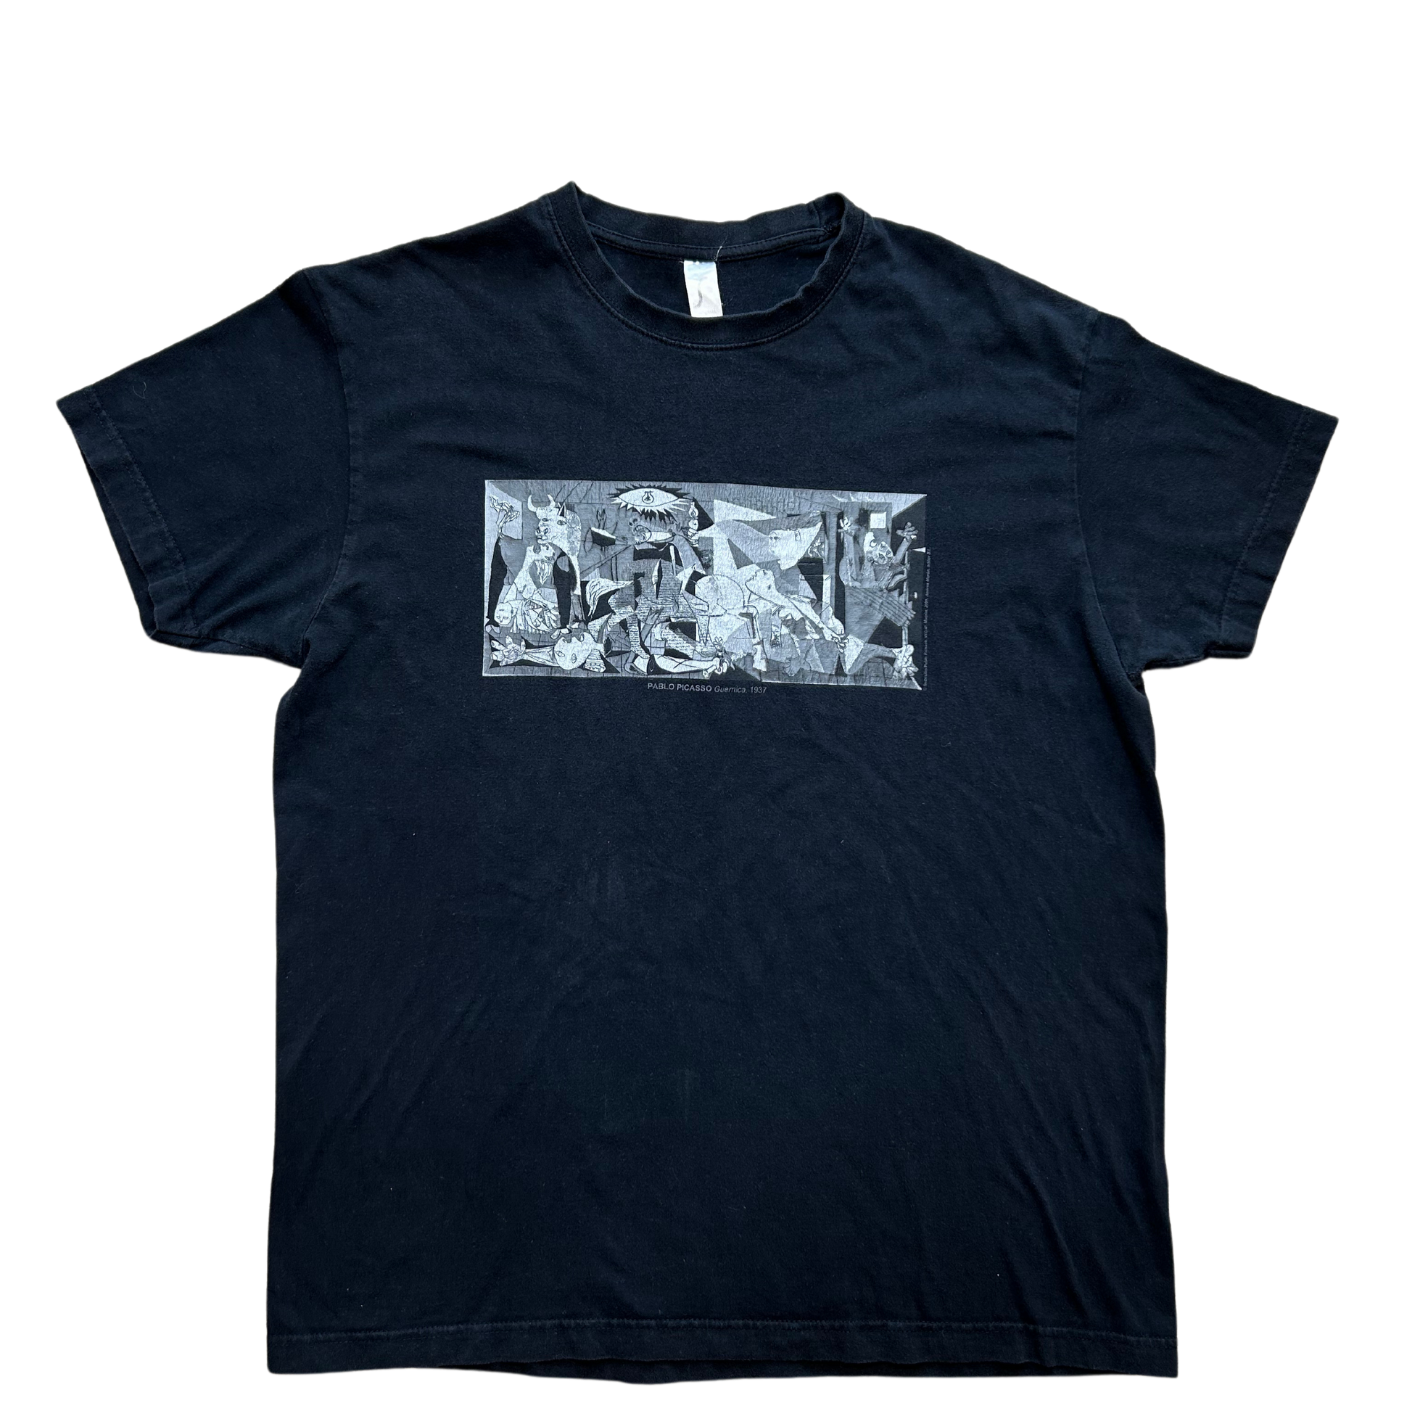 UNLABELLED VINTAGE Pablo Picasso Graphic Tee